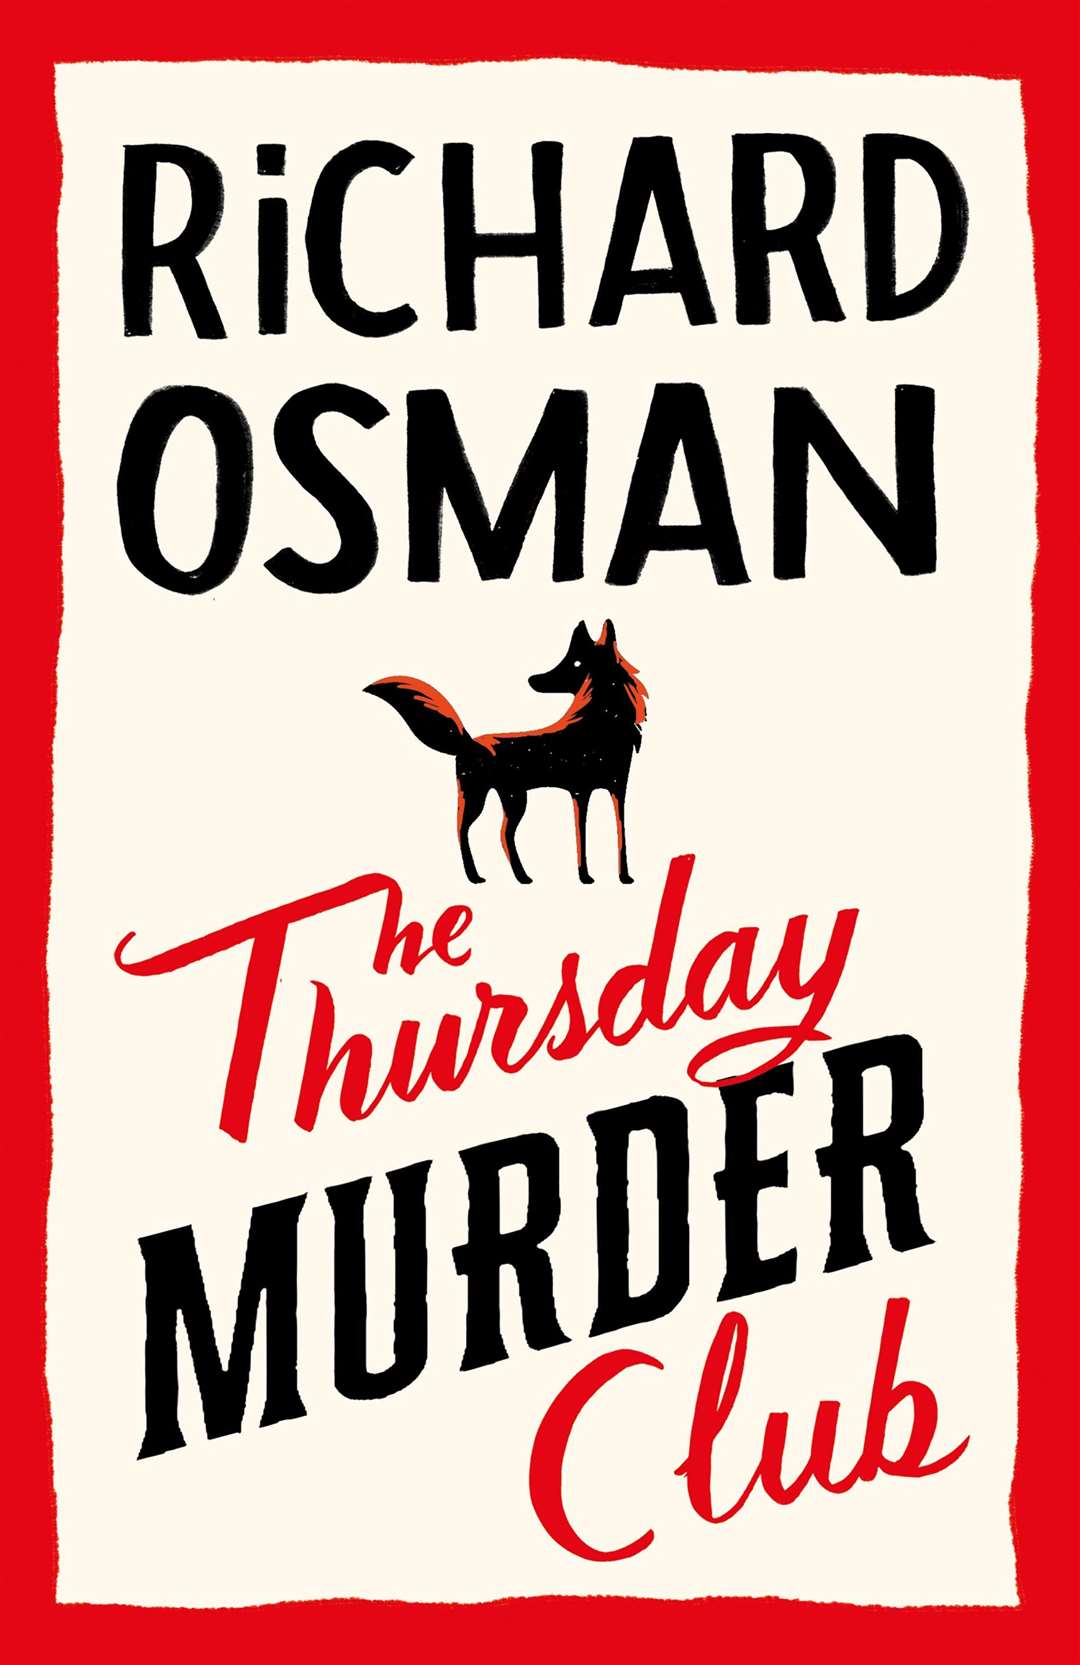 The Thursday Murder Club by Richard Osman was his debut Picture: Penguin Books